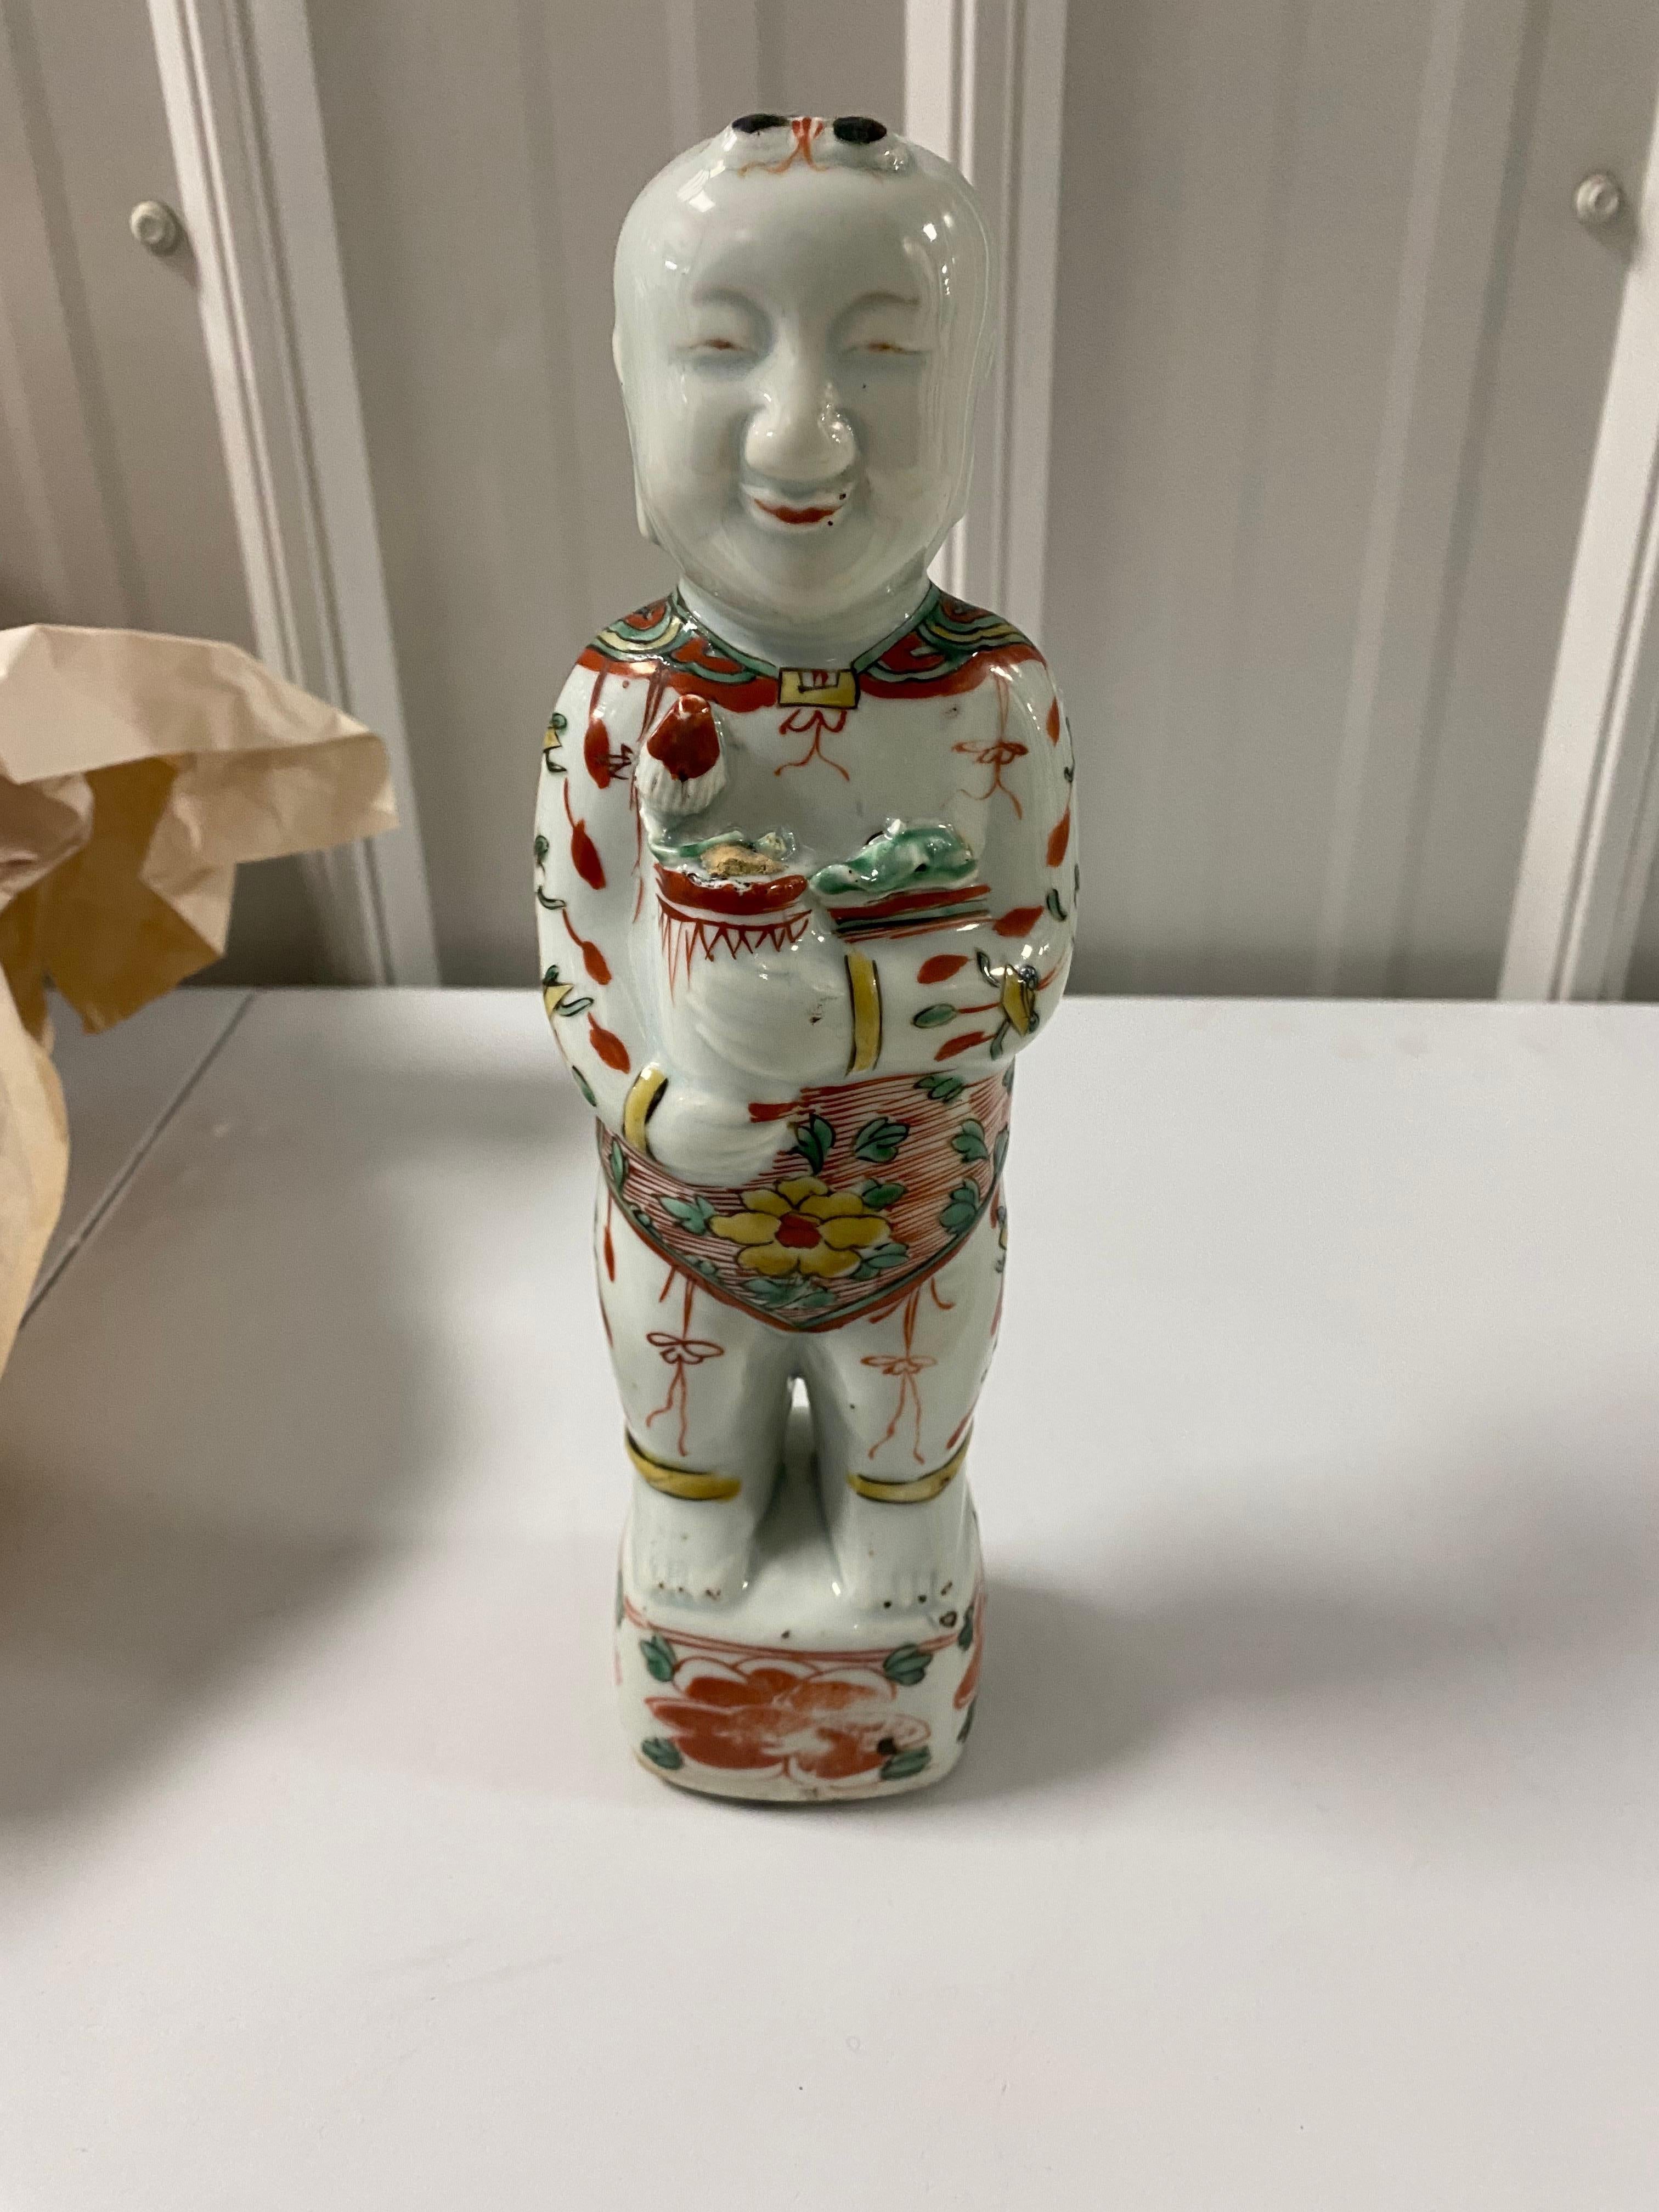 17th Century Chinese Porcelain Ho Ho Boy Figure in Wucai/Famille Vert Glaze.
Good overall condition. Screw inserted to hole on reverse to hang on wall.
Cannot tell if the front has an area of loss near the hand or it's if part of the design. Please